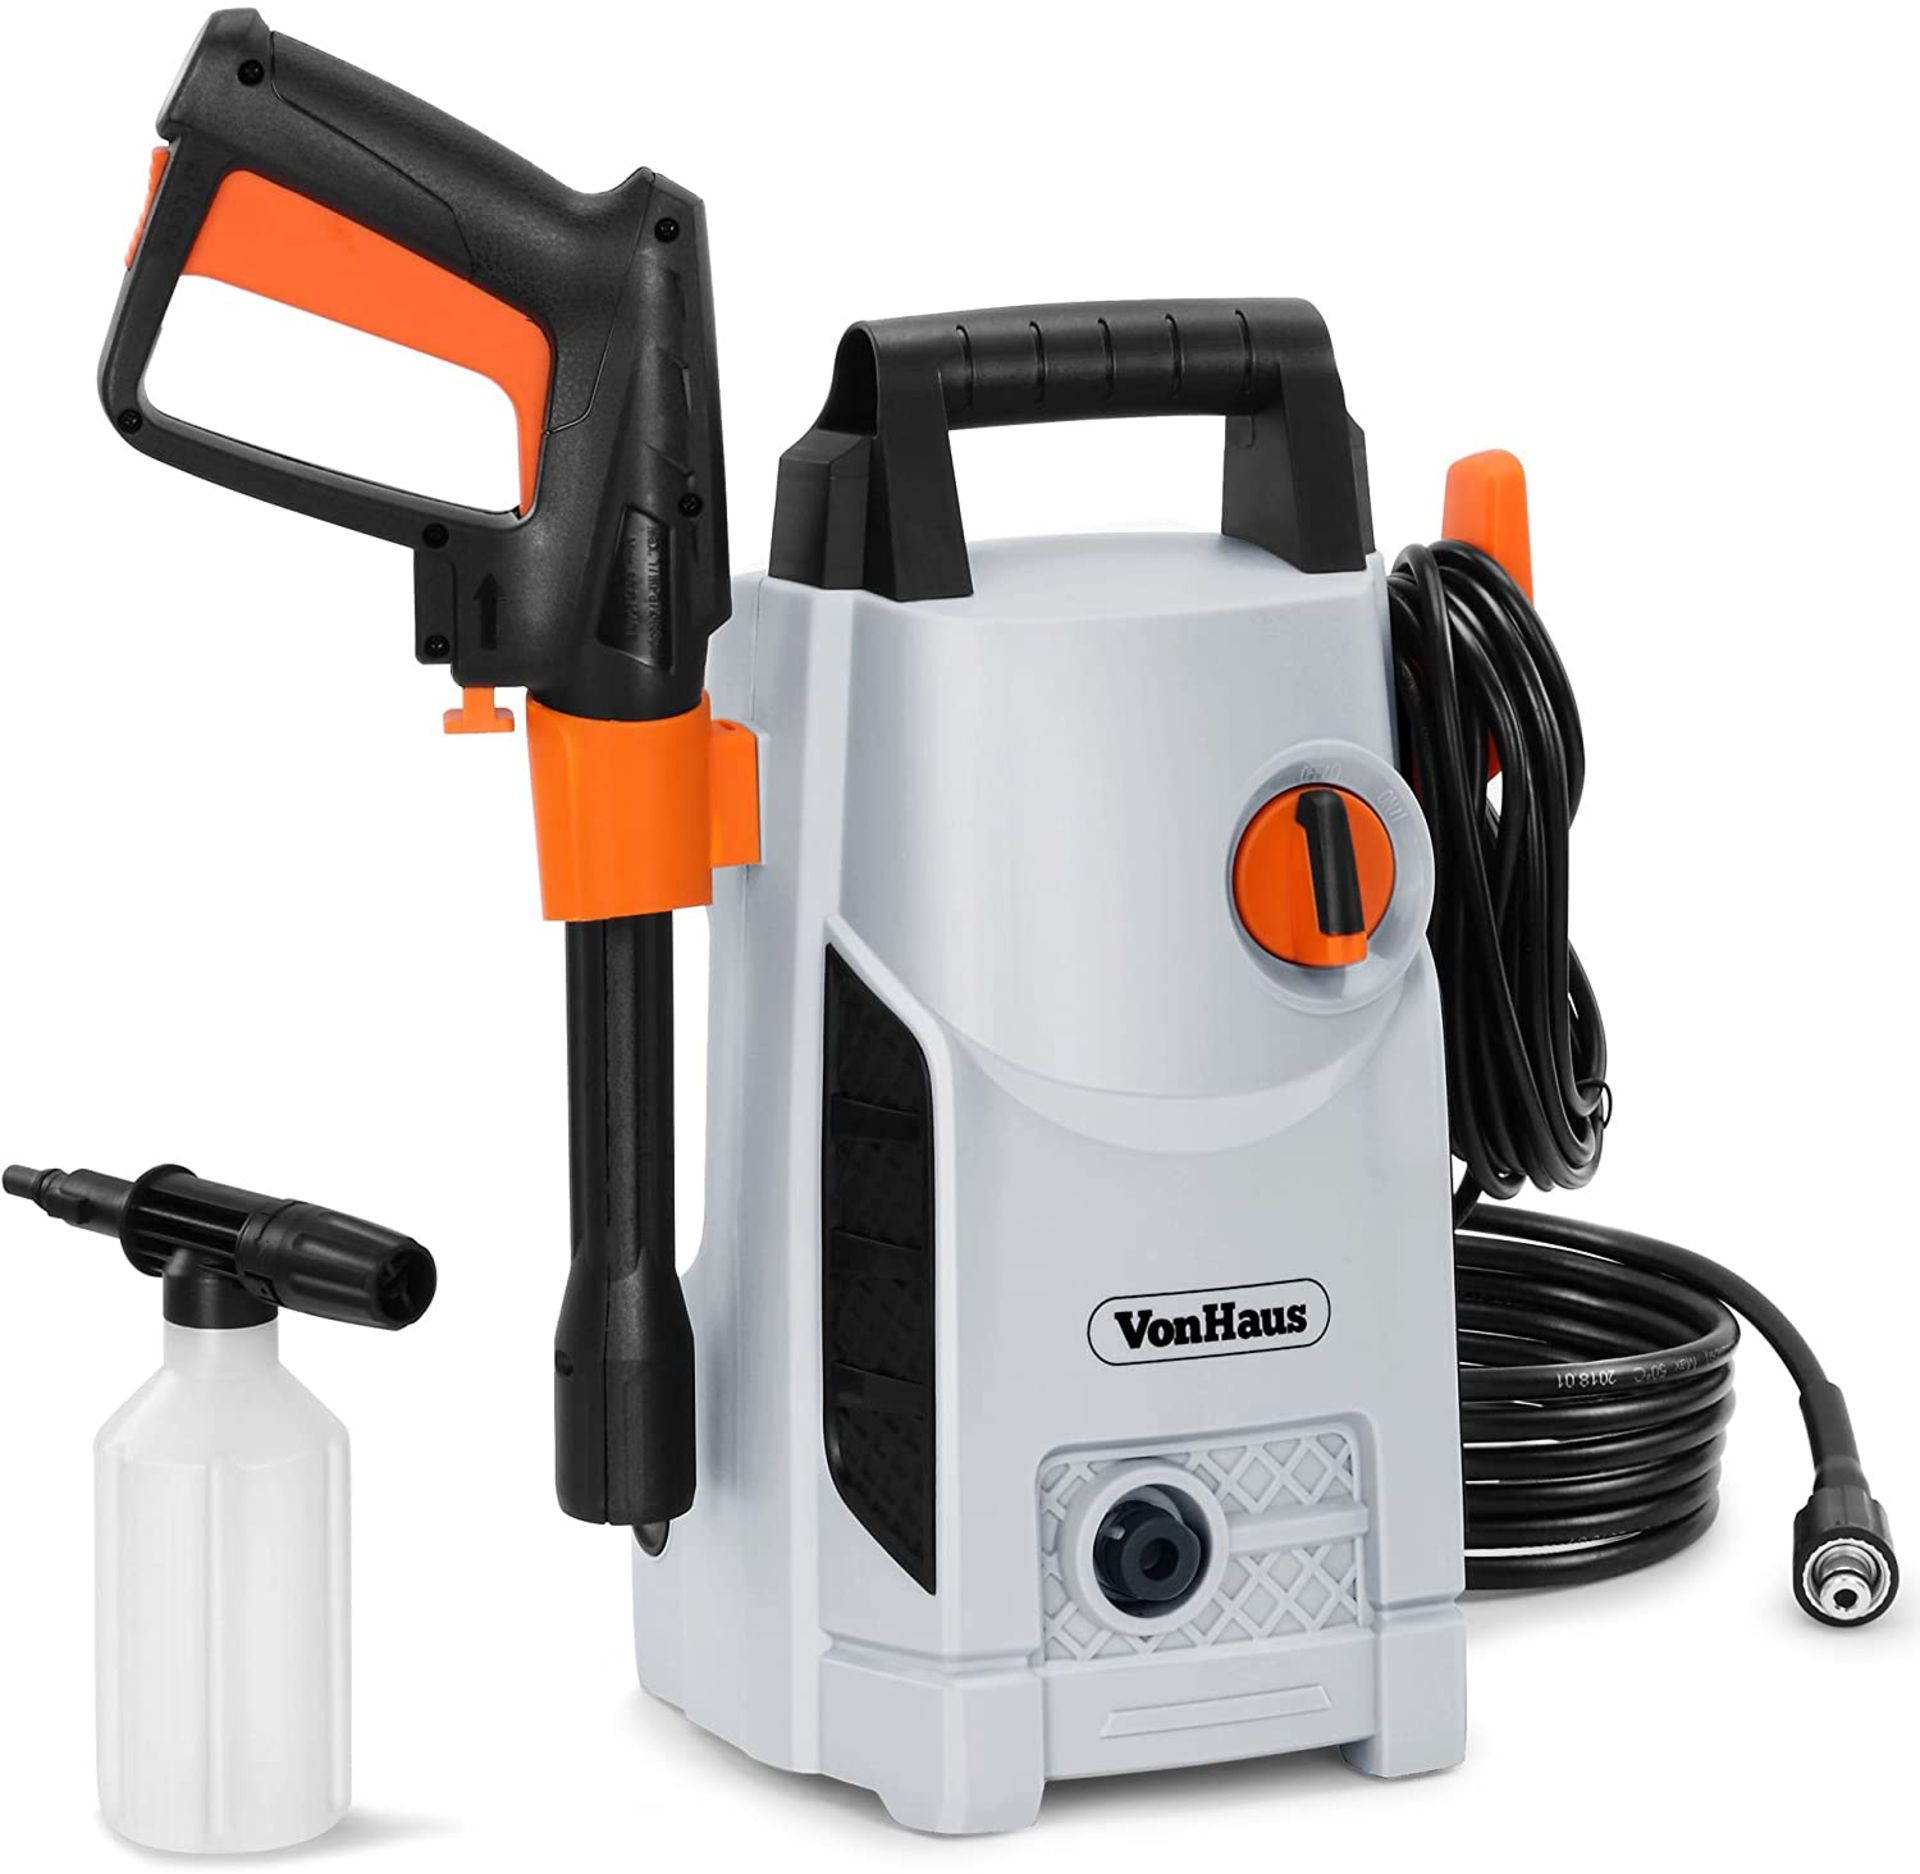 (GL80) 1600W Pressure Washer with Accessories – Outdoor Home/Patio & Car Cleaner - 90bar work... - Image 2 of 3